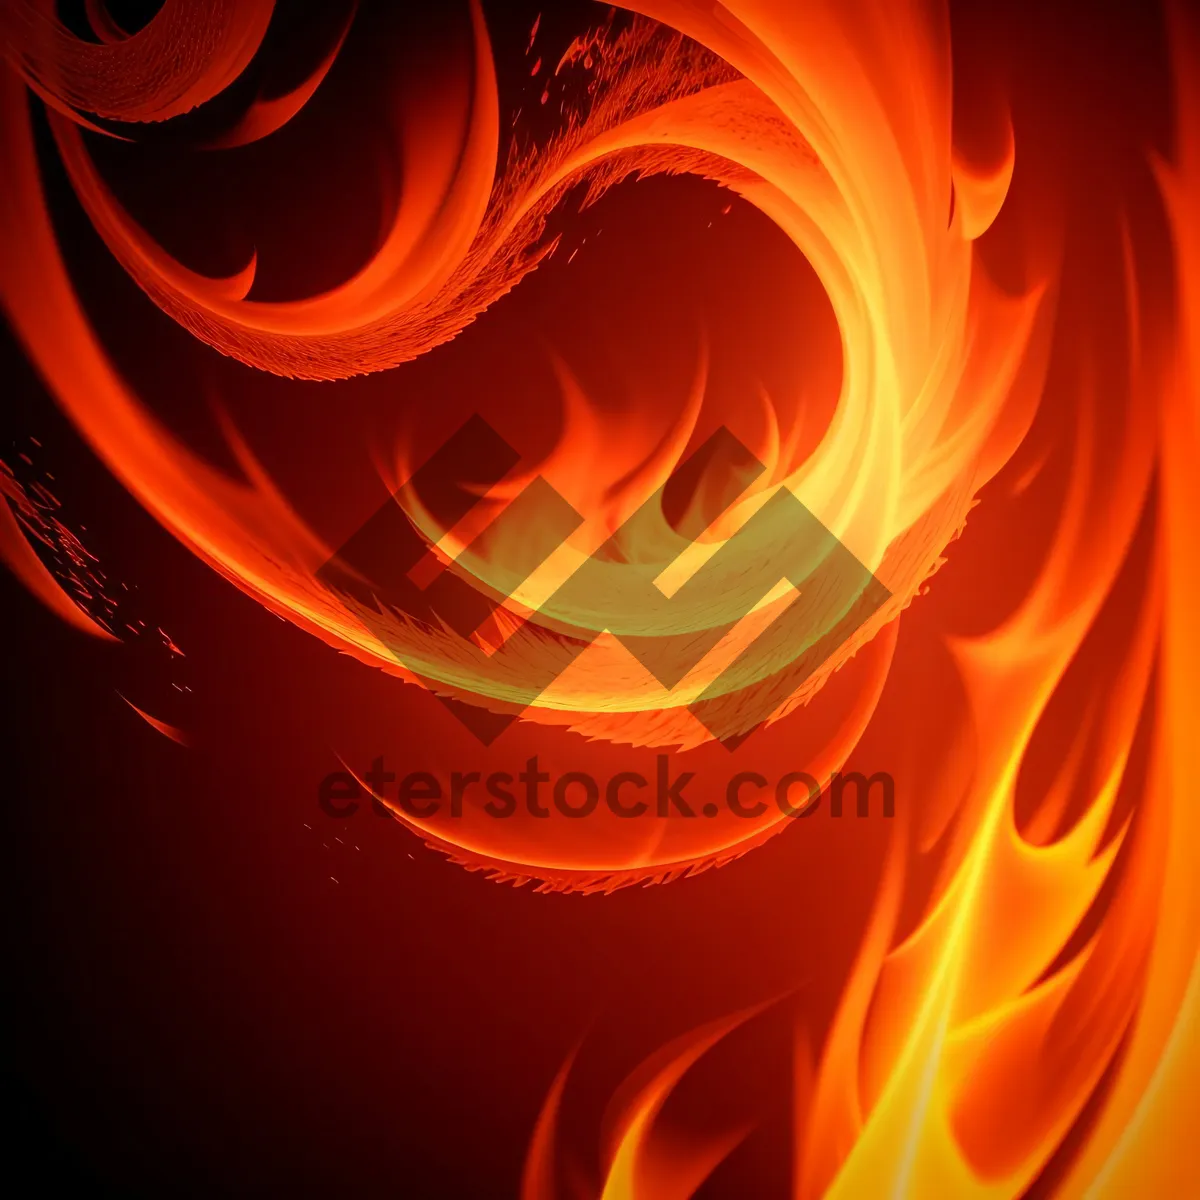 Picture of Abstract Fire Art Explosion in Vibrant Colors